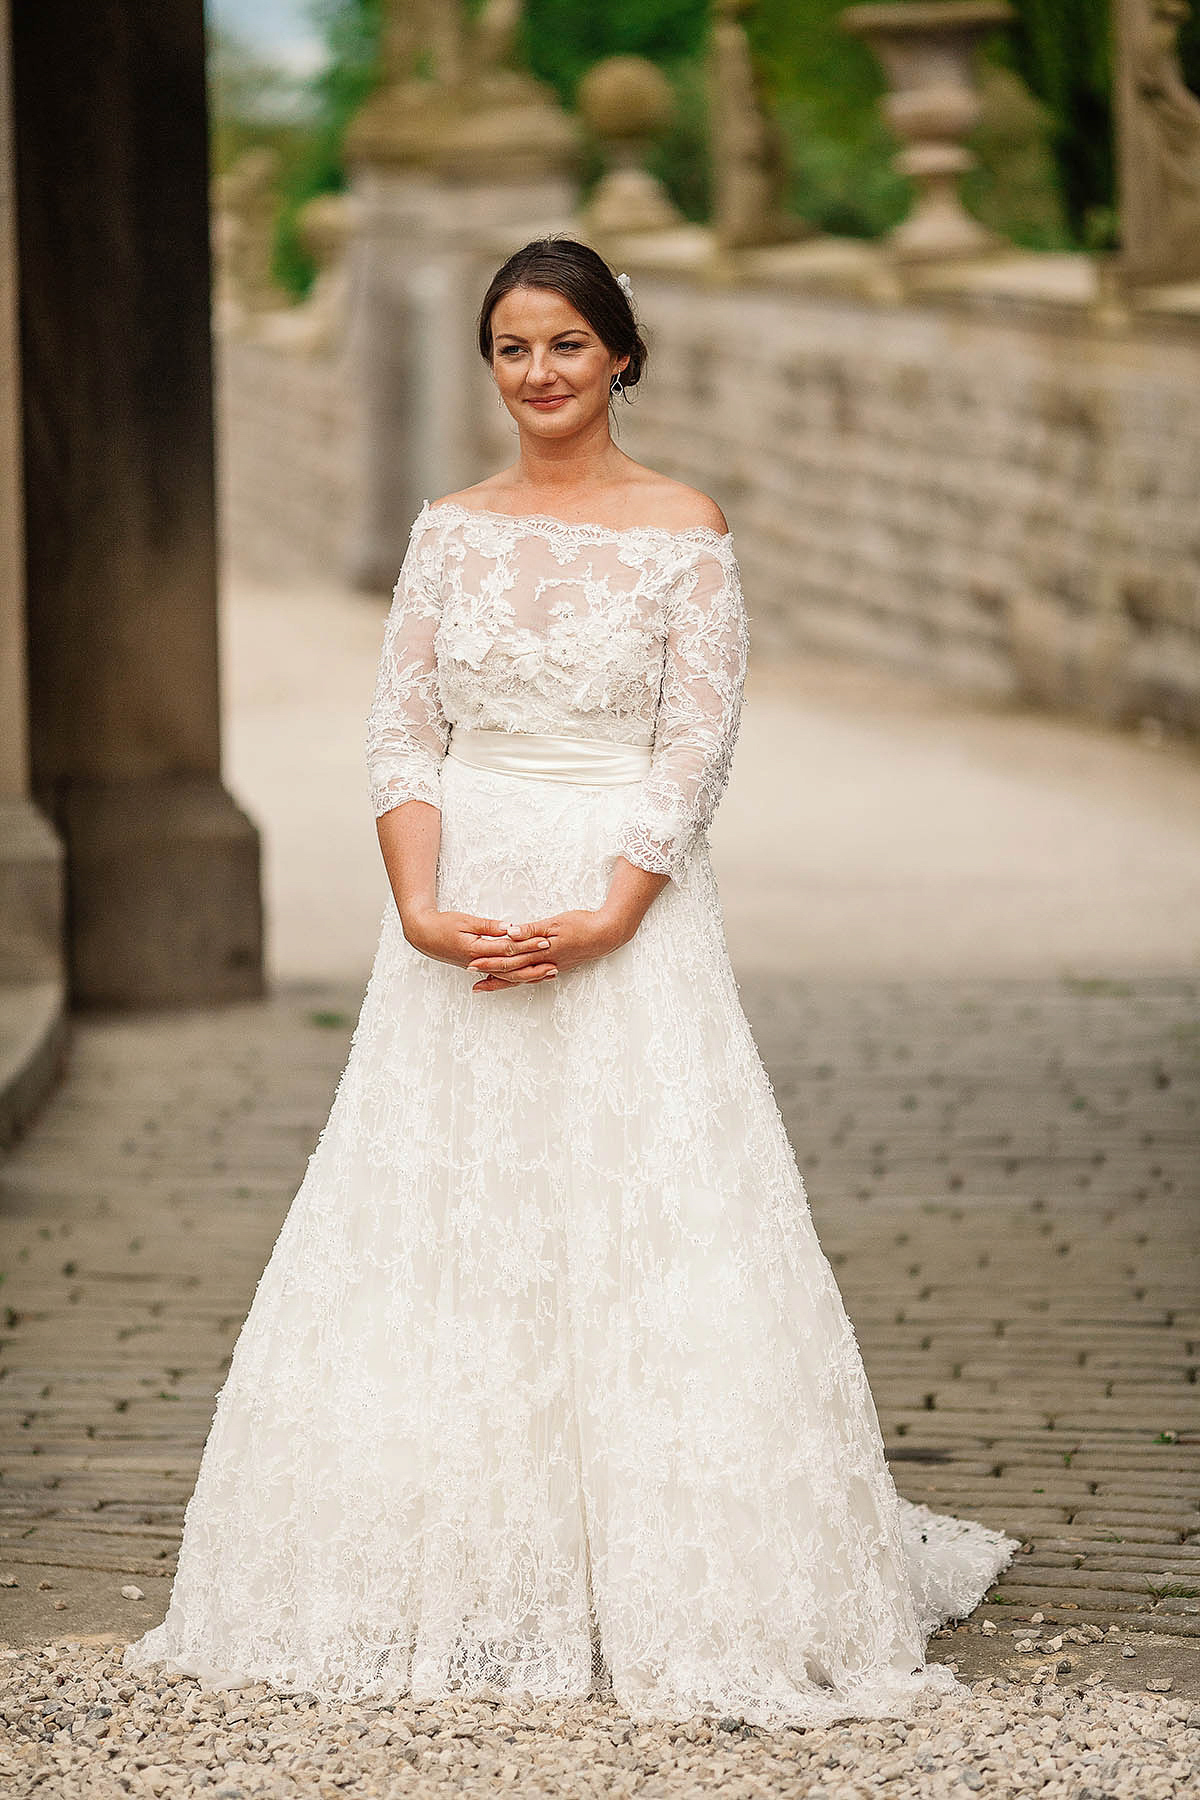 Marisa wore an Elie Saab gown for her elegant wedding at Lartington Hall. Captured by Paul Joseph Photography.